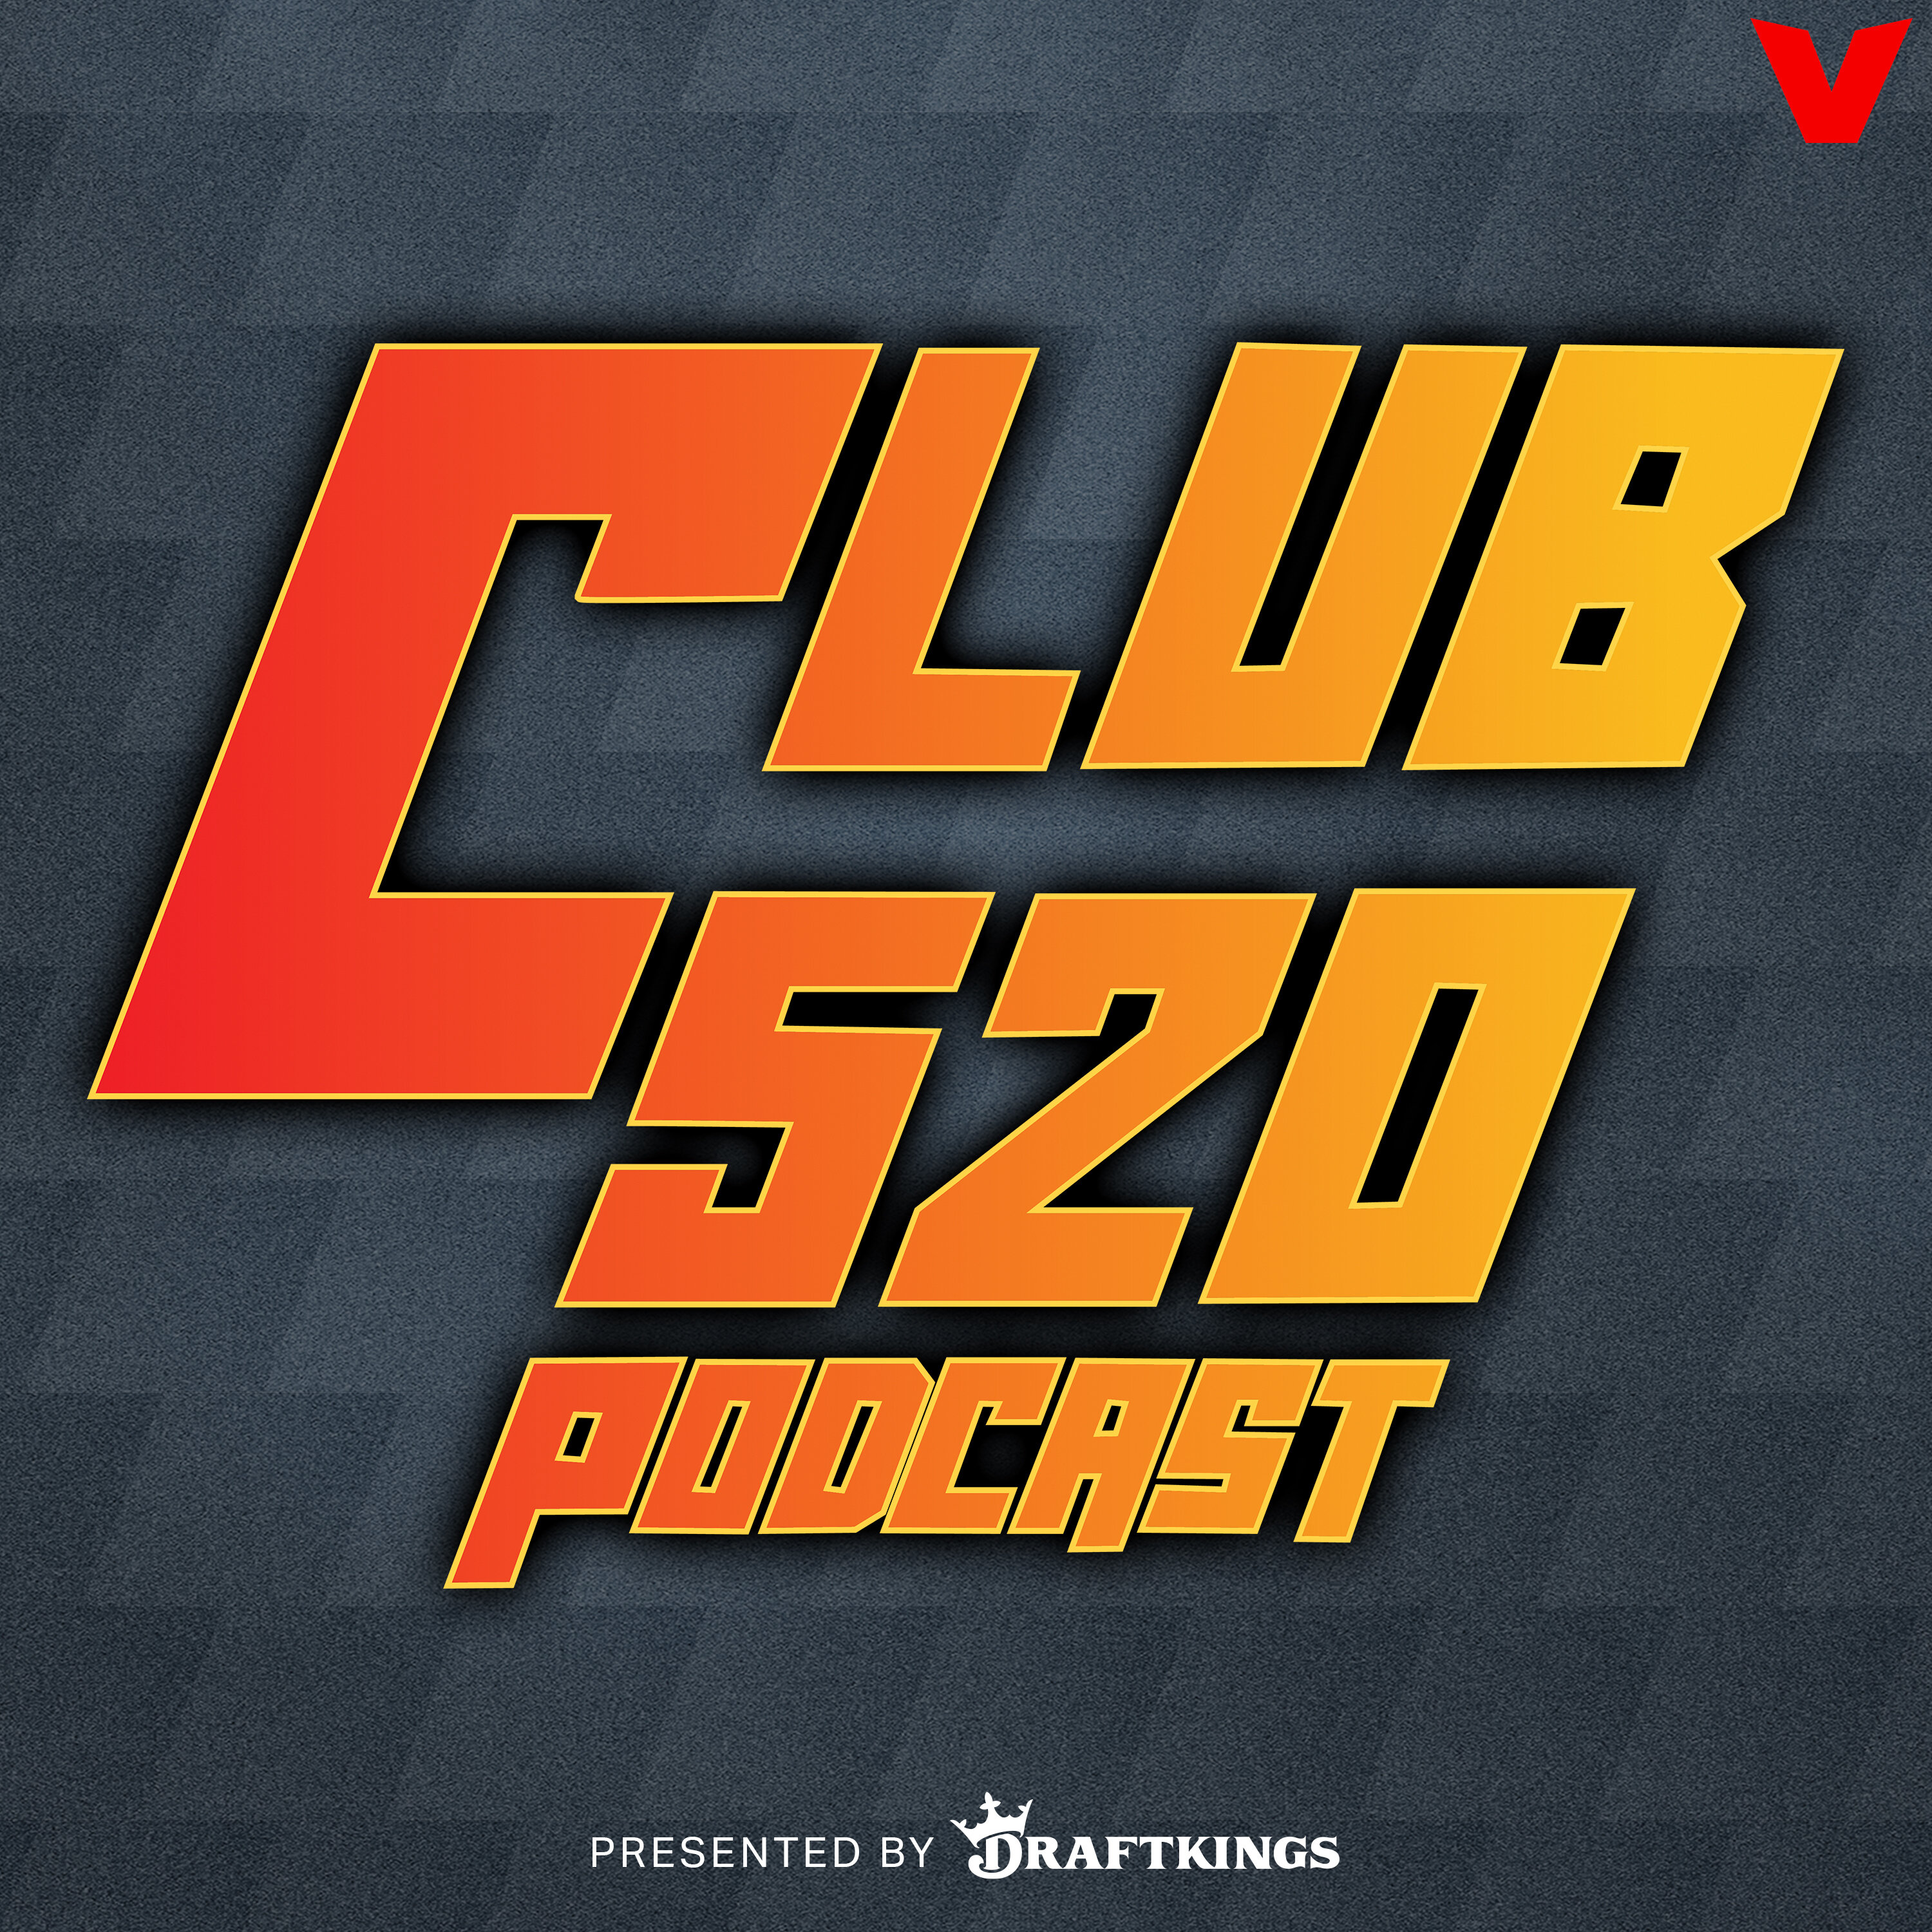 Club 520 - Jeff Teague says Warriors dynasty OVER, LeBron’s Lakers need fix, Jason Whitlock reaction